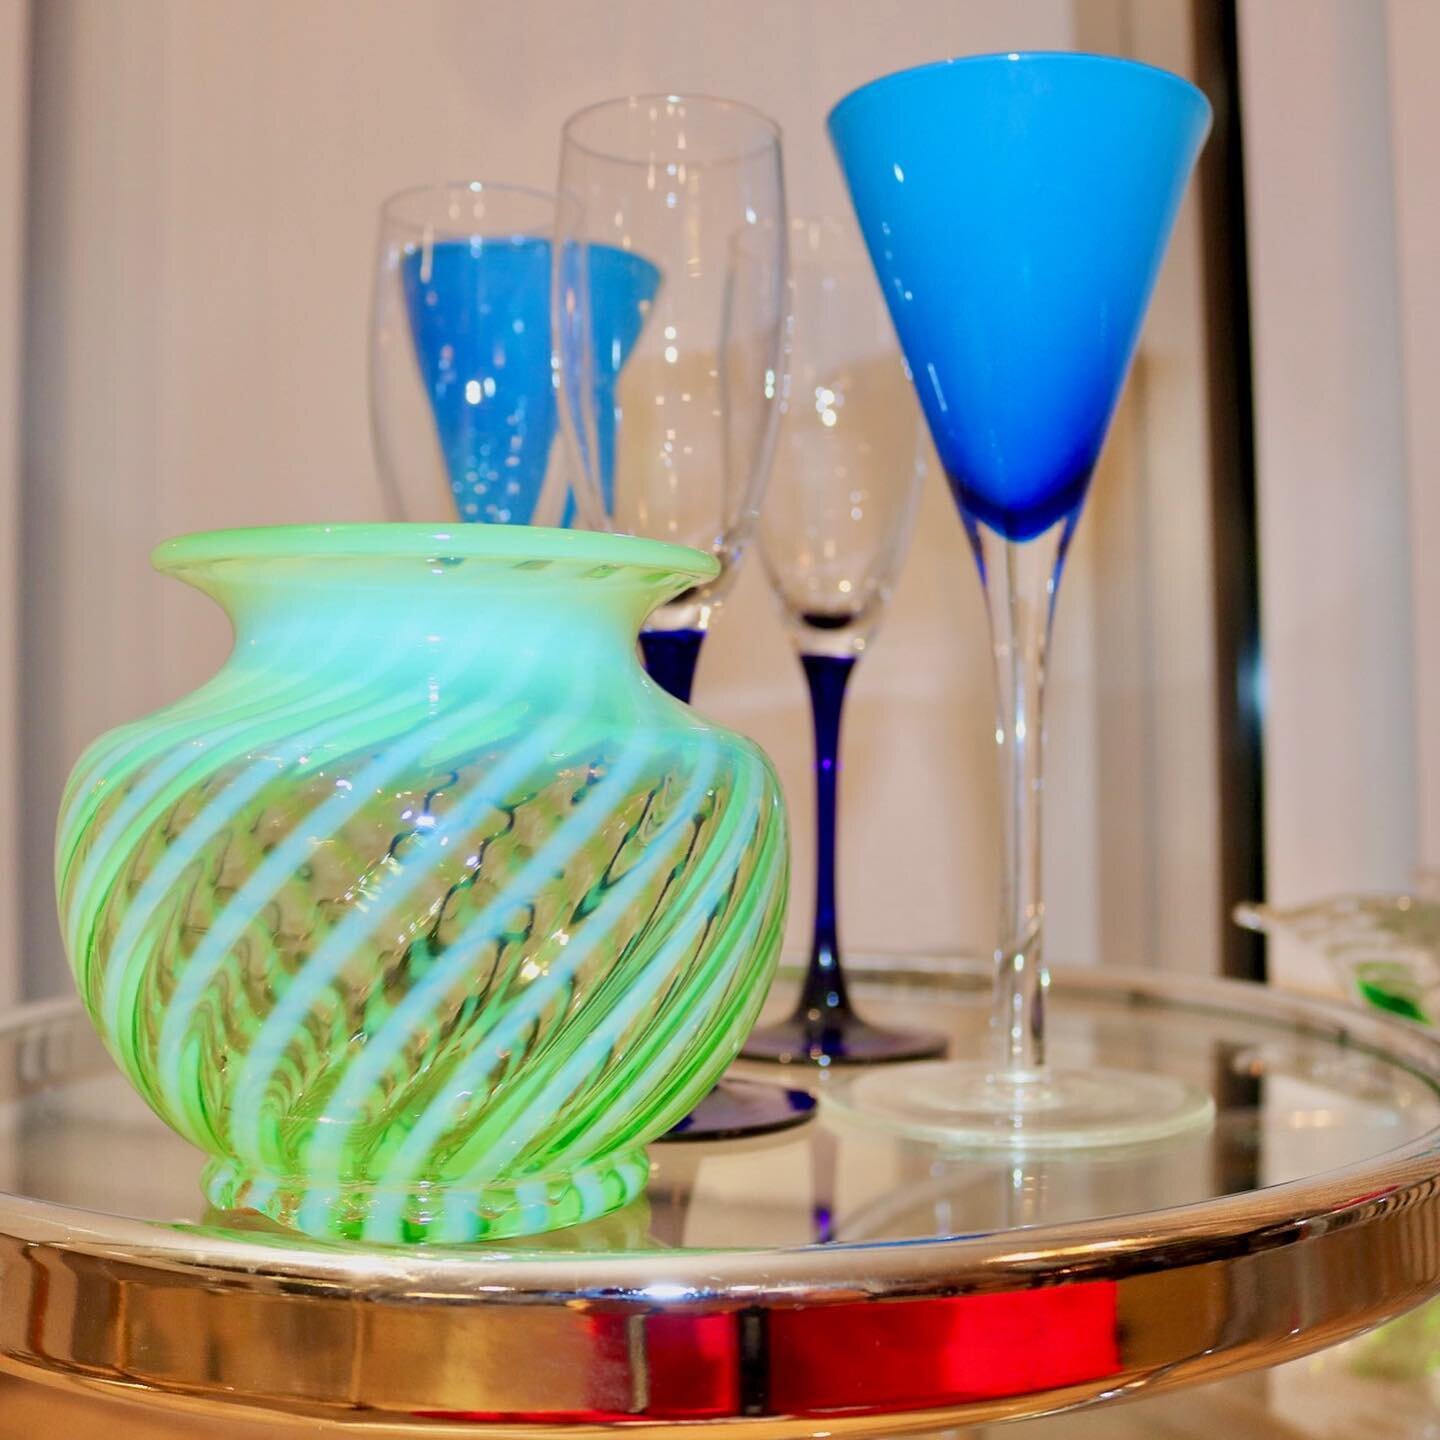 💚💙 Cocktail time anyone?! (I need one right now during this debate..) These vibrant martini and champagne glasses are available 😍
Set of 2 blue martini glasses $30
3 champagne glasses with blue stems $40
Small, green, Murano style swirl vase $50
M